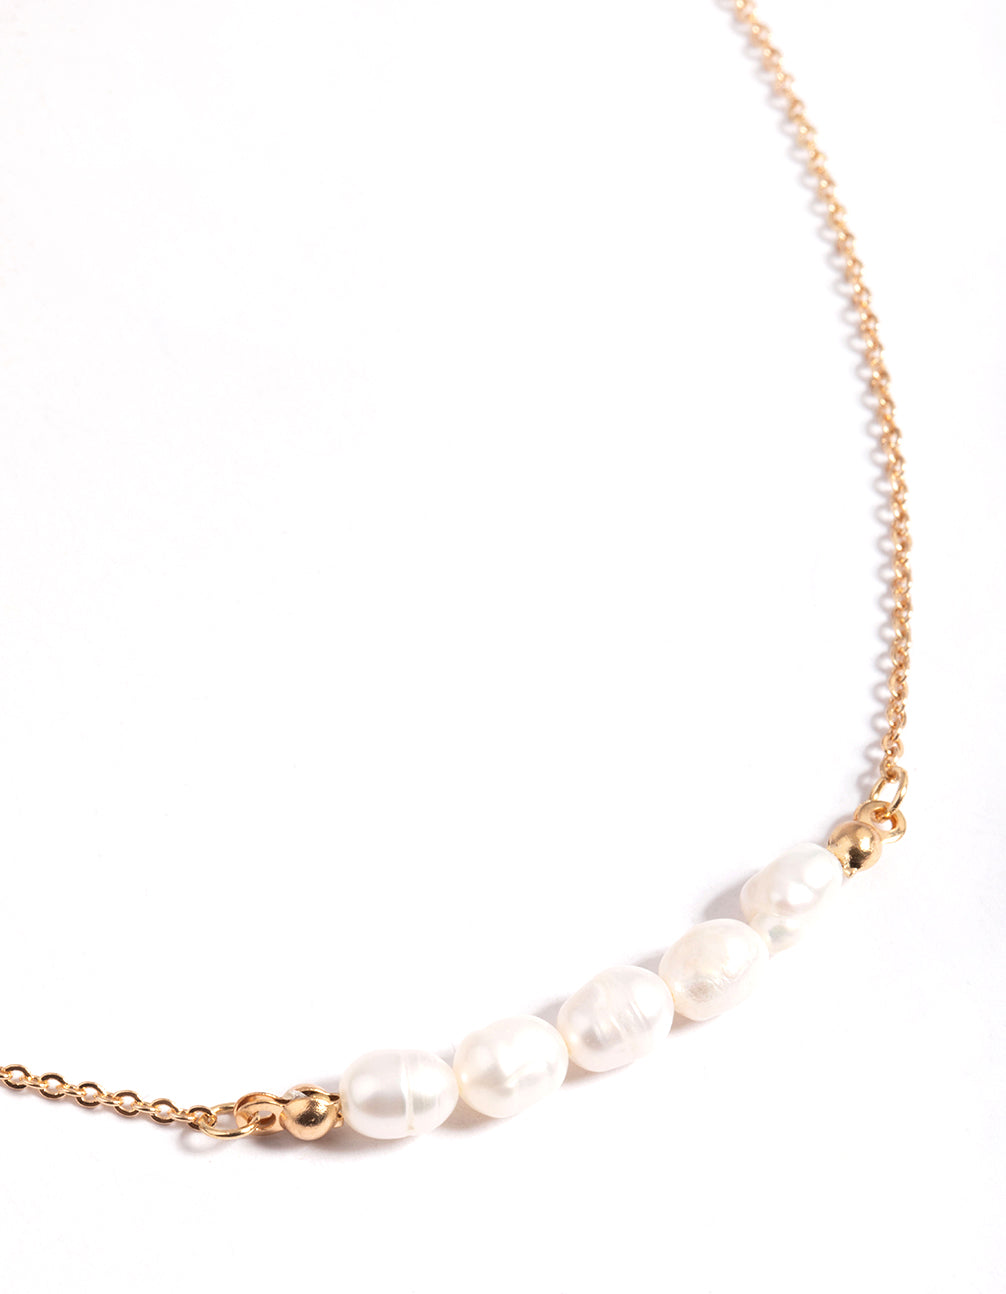 Handmade White Freshwater Rice Lovisa Pearl Necklace With Micro Inlay And  Zircon Accents Swan Shape Clasp For Sweaters 56cm Length From  Ziyou2010_shop, $40.71 | DHgate.Com